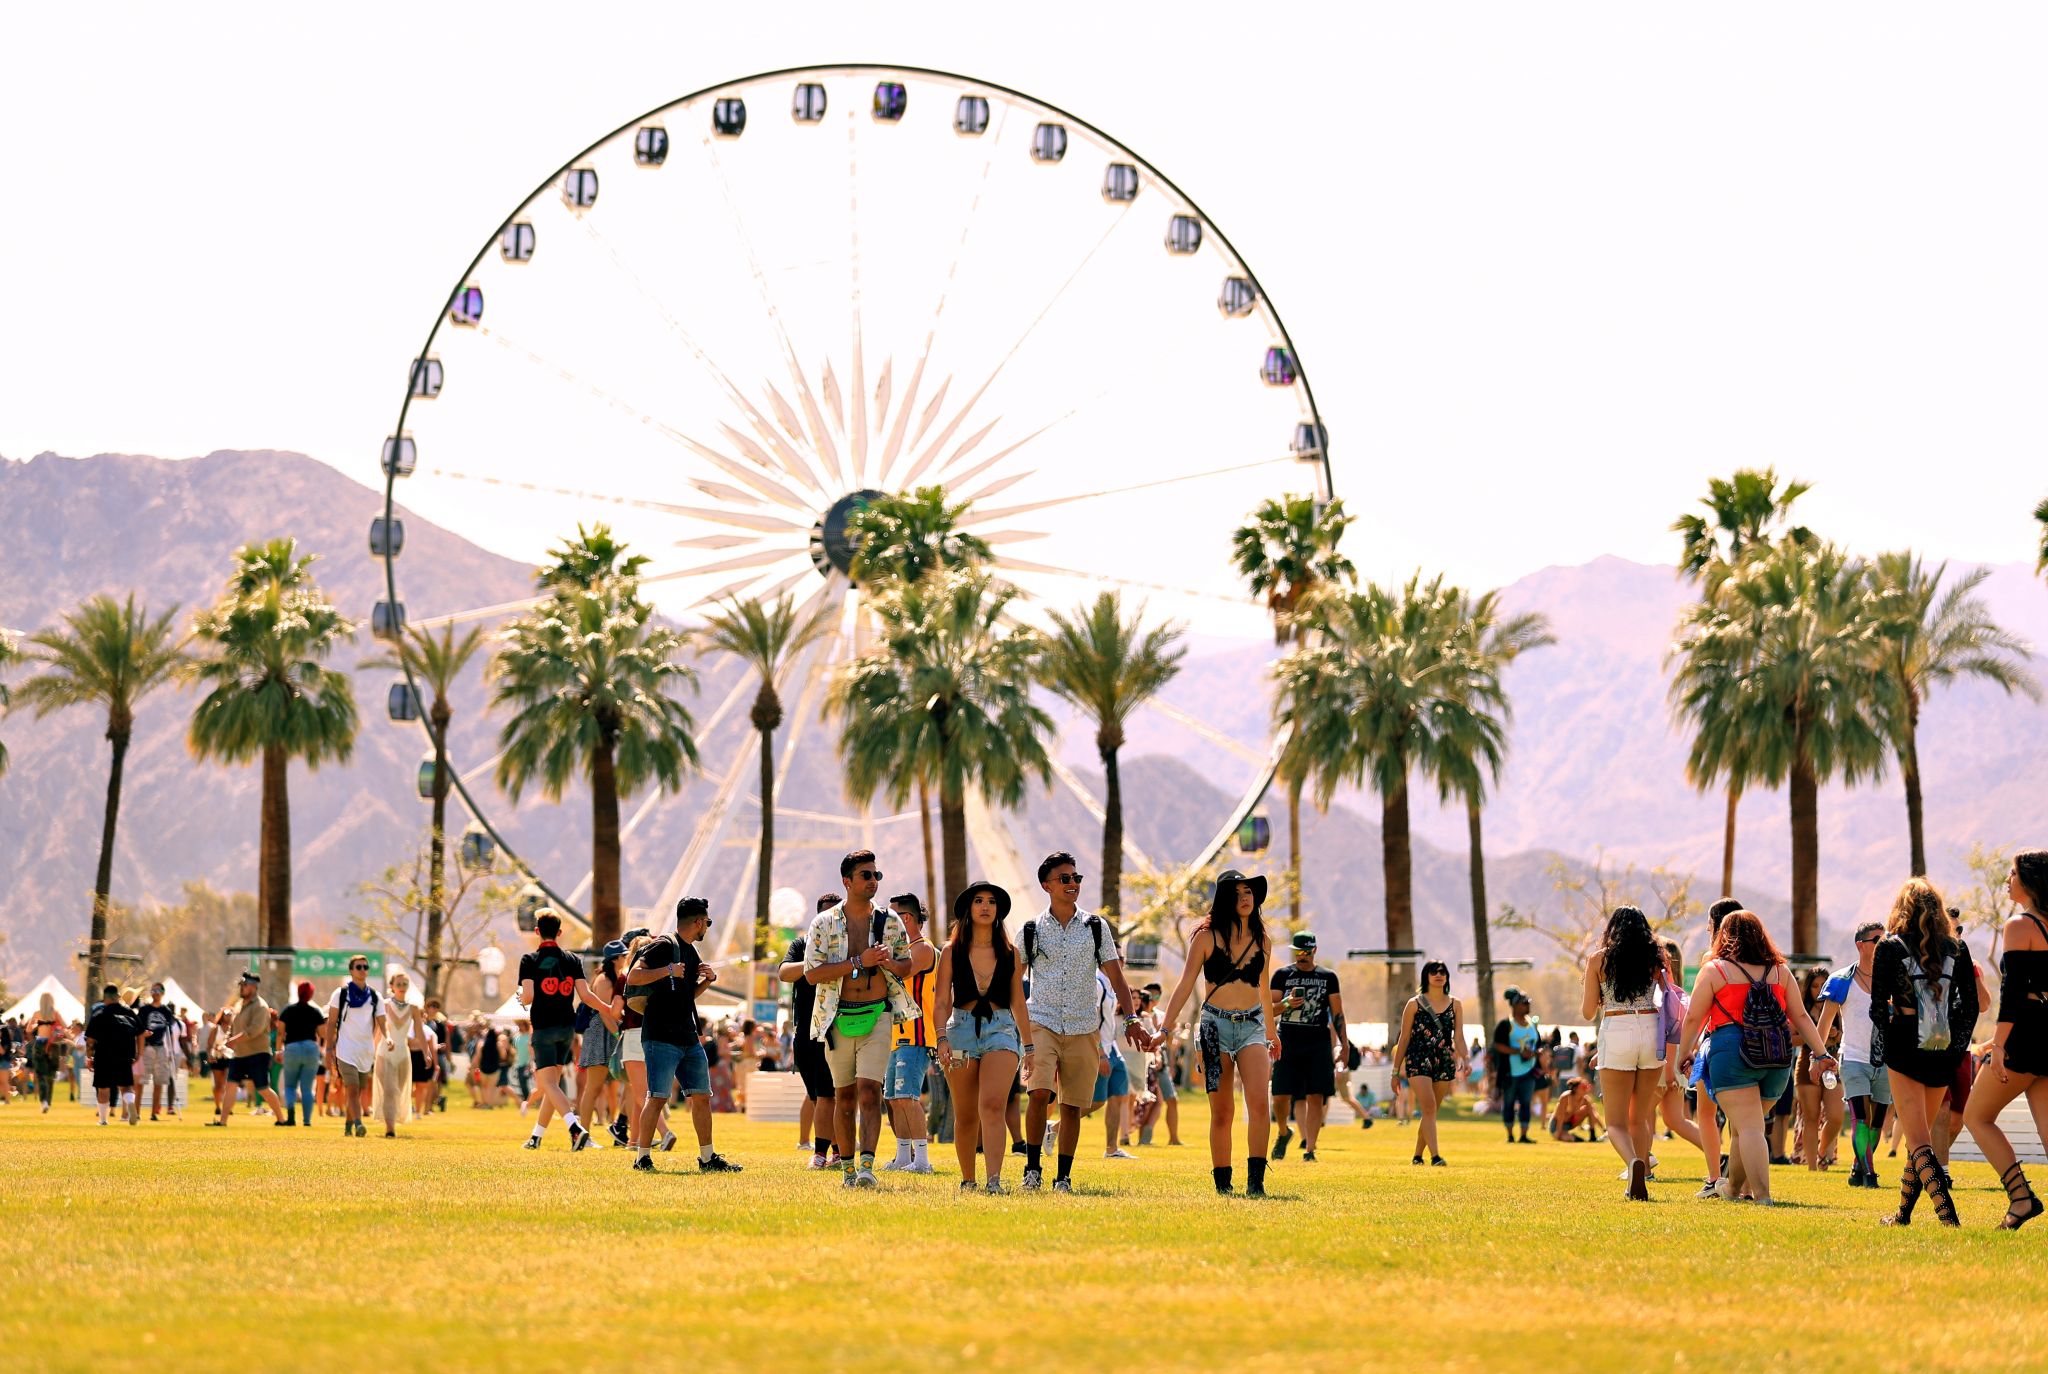 Coachella tickets go on sale Friday at 10 a.m. — here's how to get them